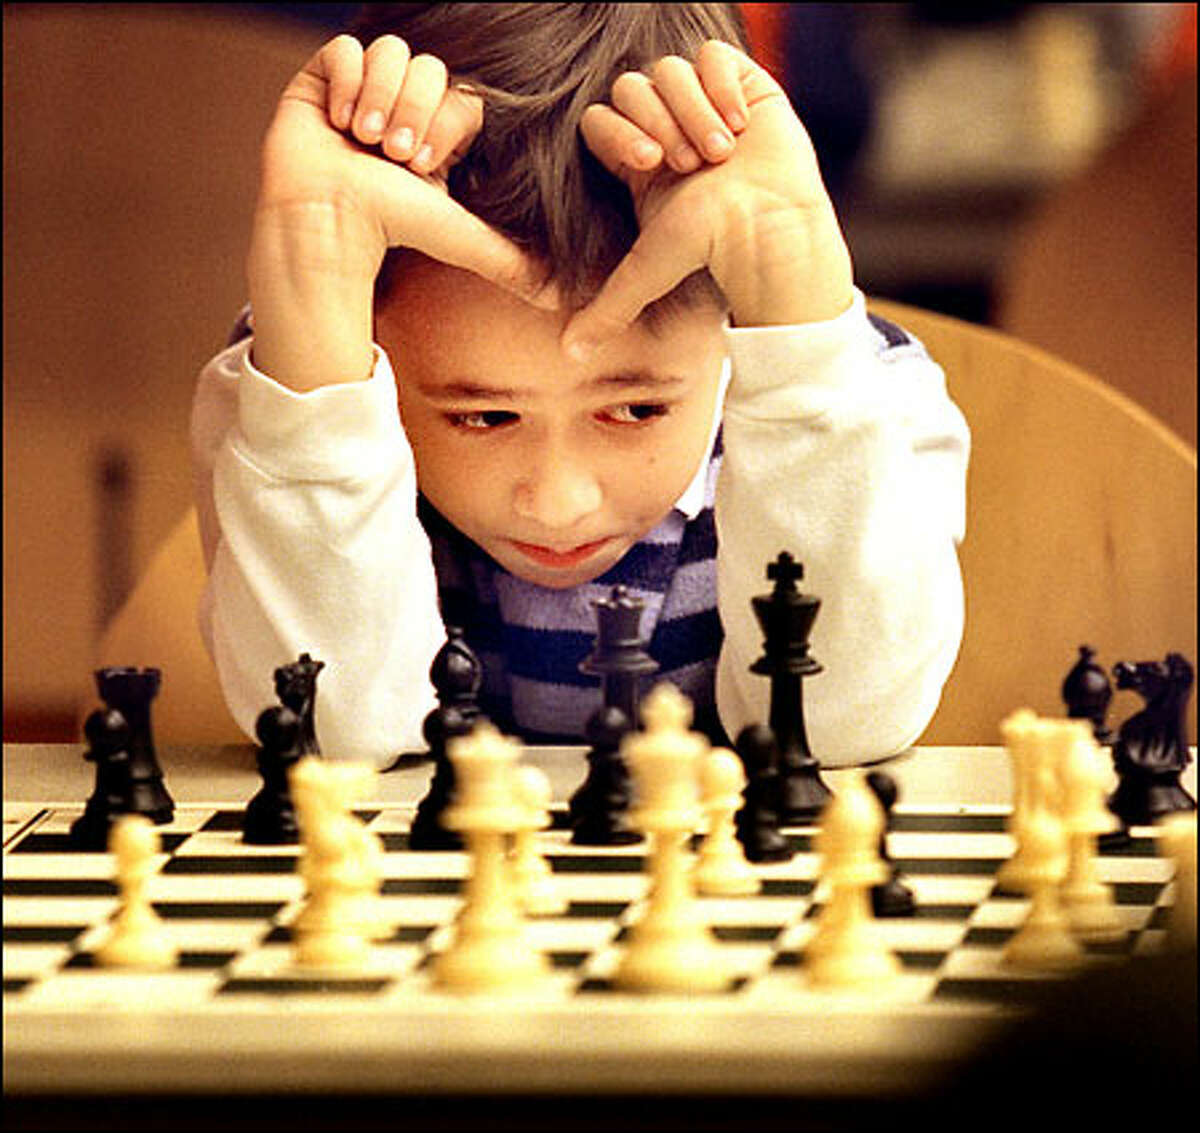 Derek Gasaway, 7, from Whittier Elementary School in Ballard concentrates while playing chess with Dr. Leo Stefurak at the Seattle Art Museum.